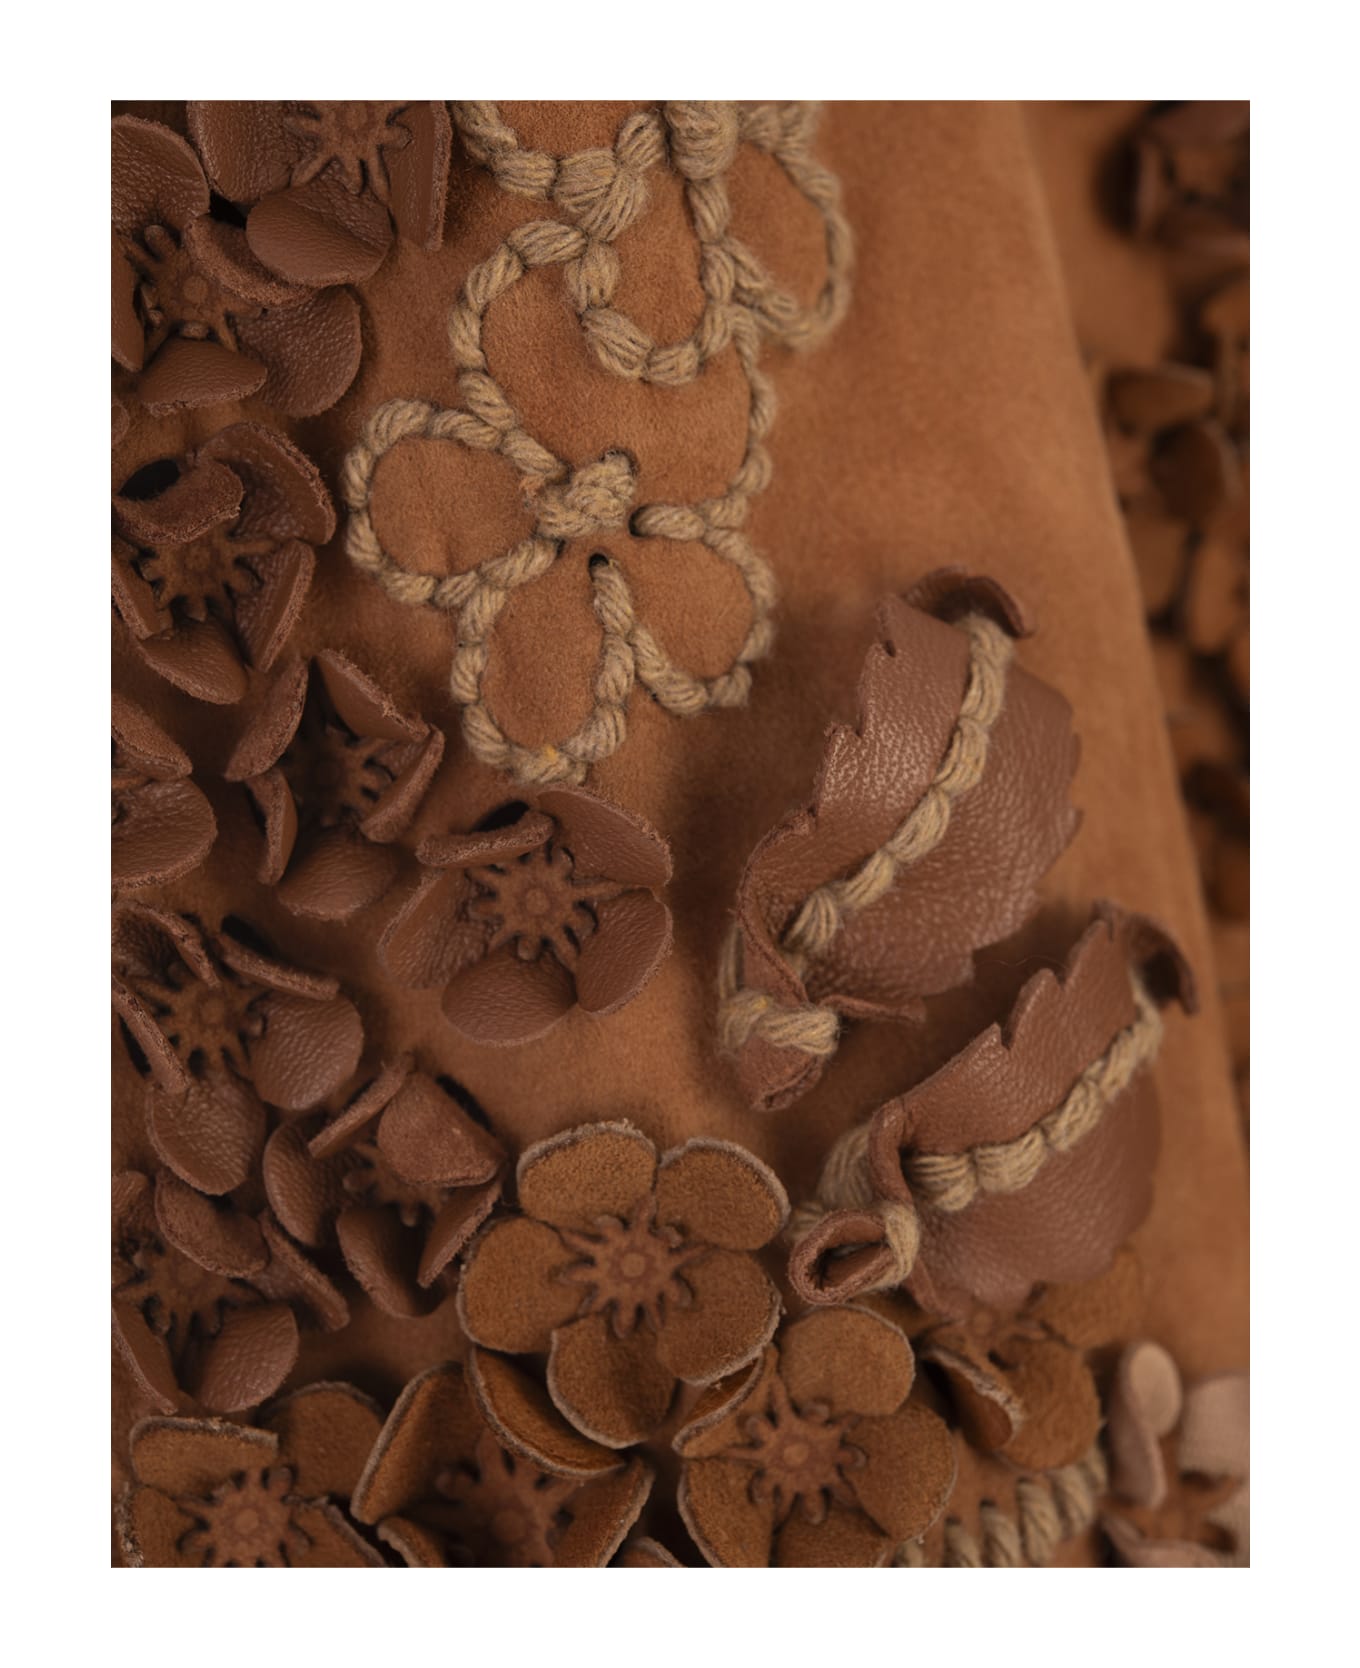 Ermanno Scervino Brown Suede One-breasted Jacket With Embroidery And Appliqués - Brown